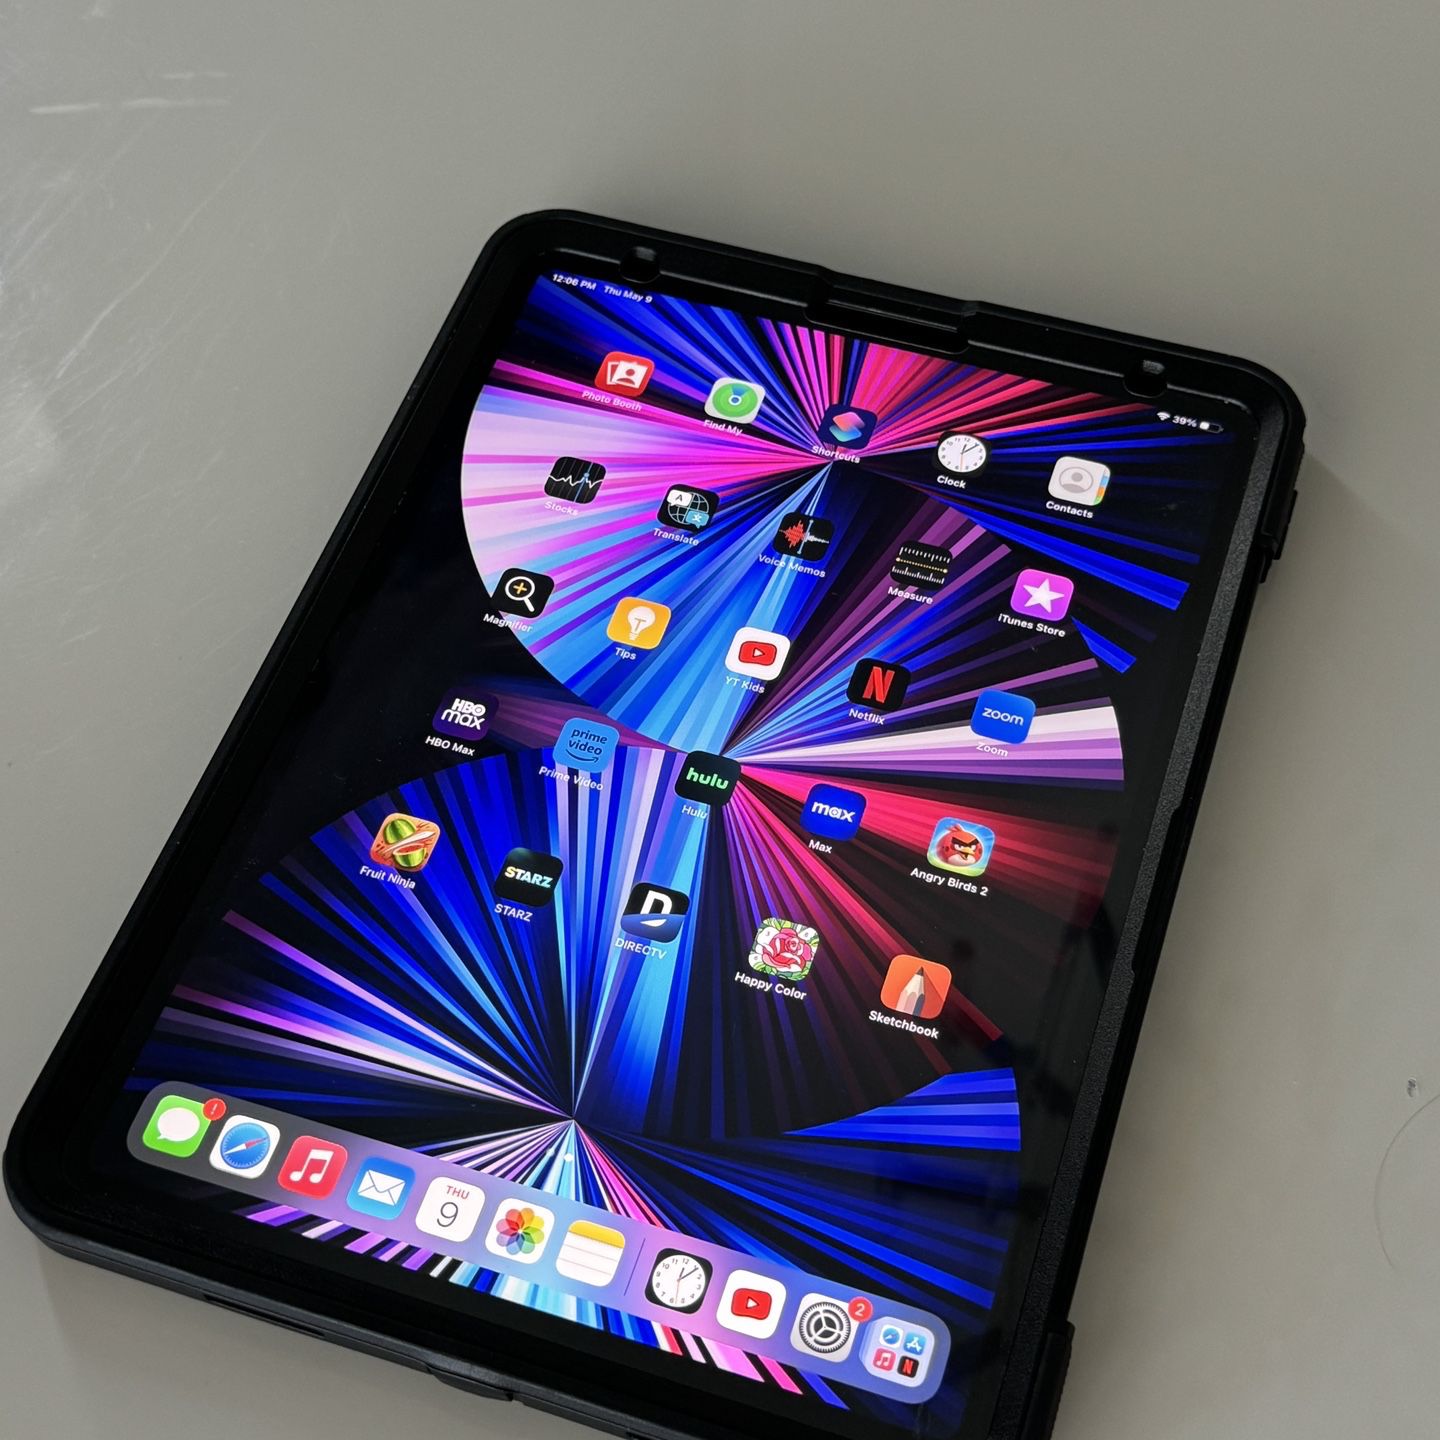 Apple iPad Pro 11-inch Wi-Fi Only (2021, 3rd Generation)